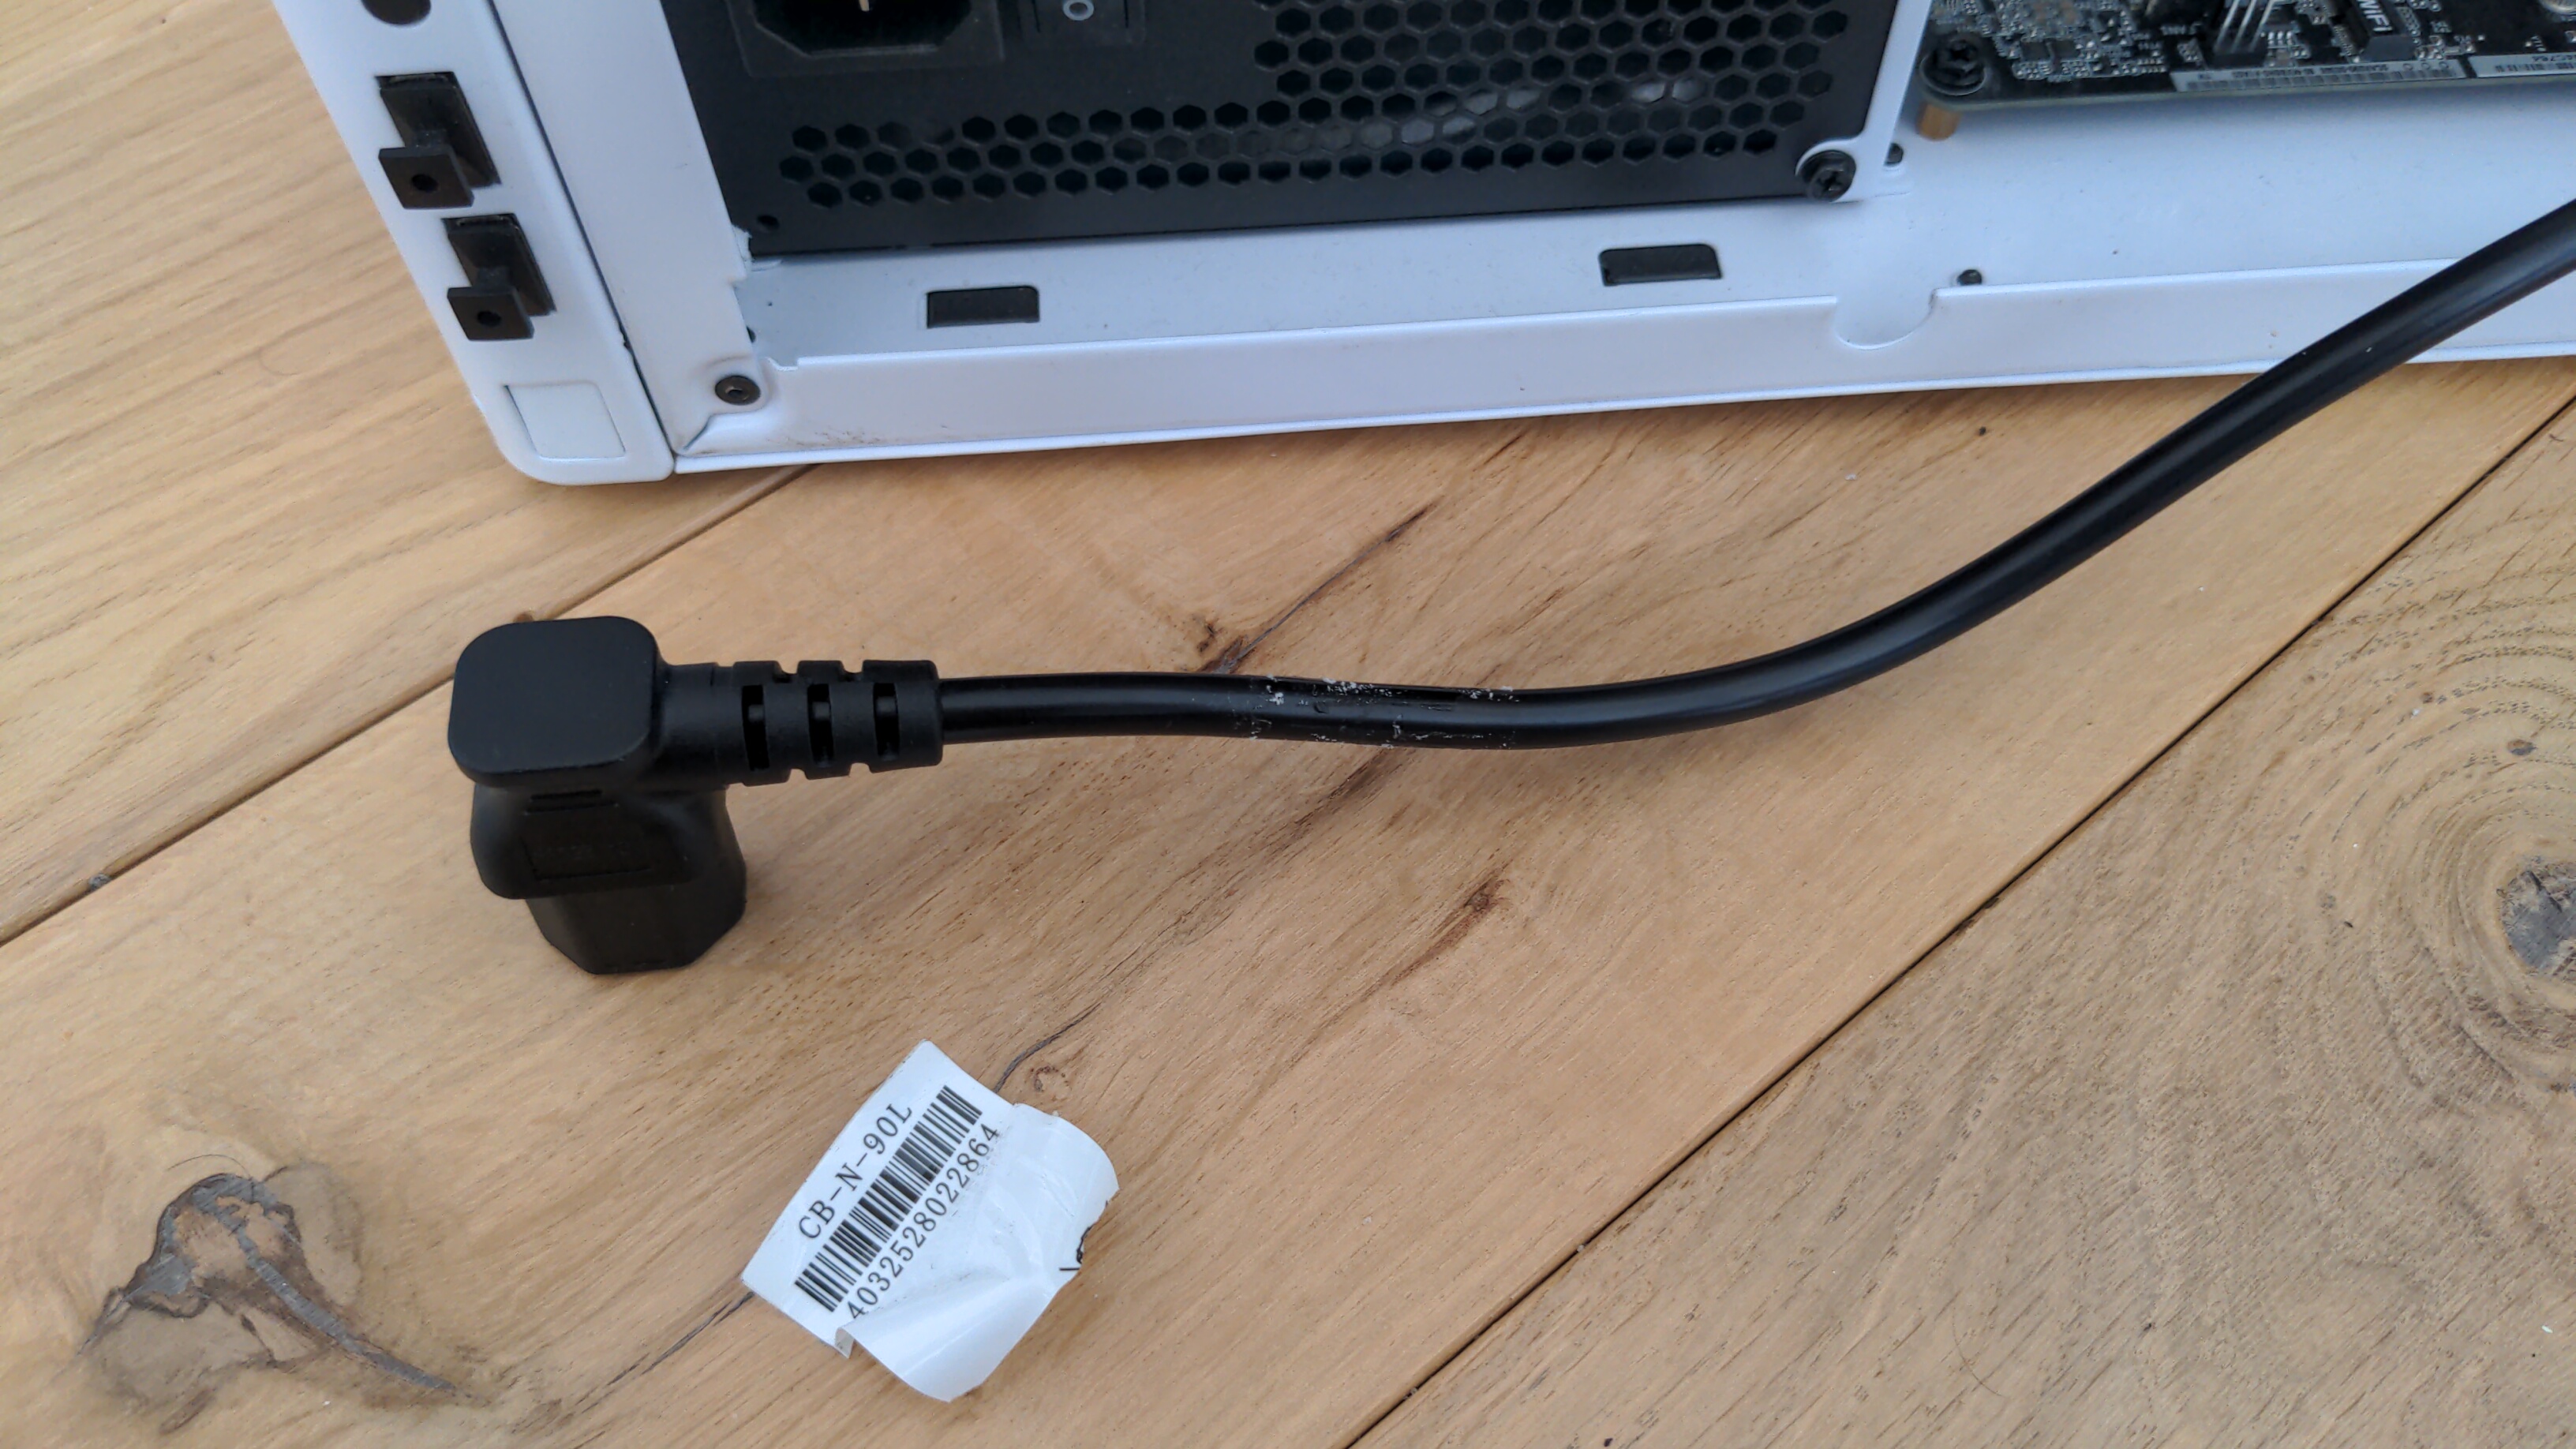 The cable, with the CE sticker removed